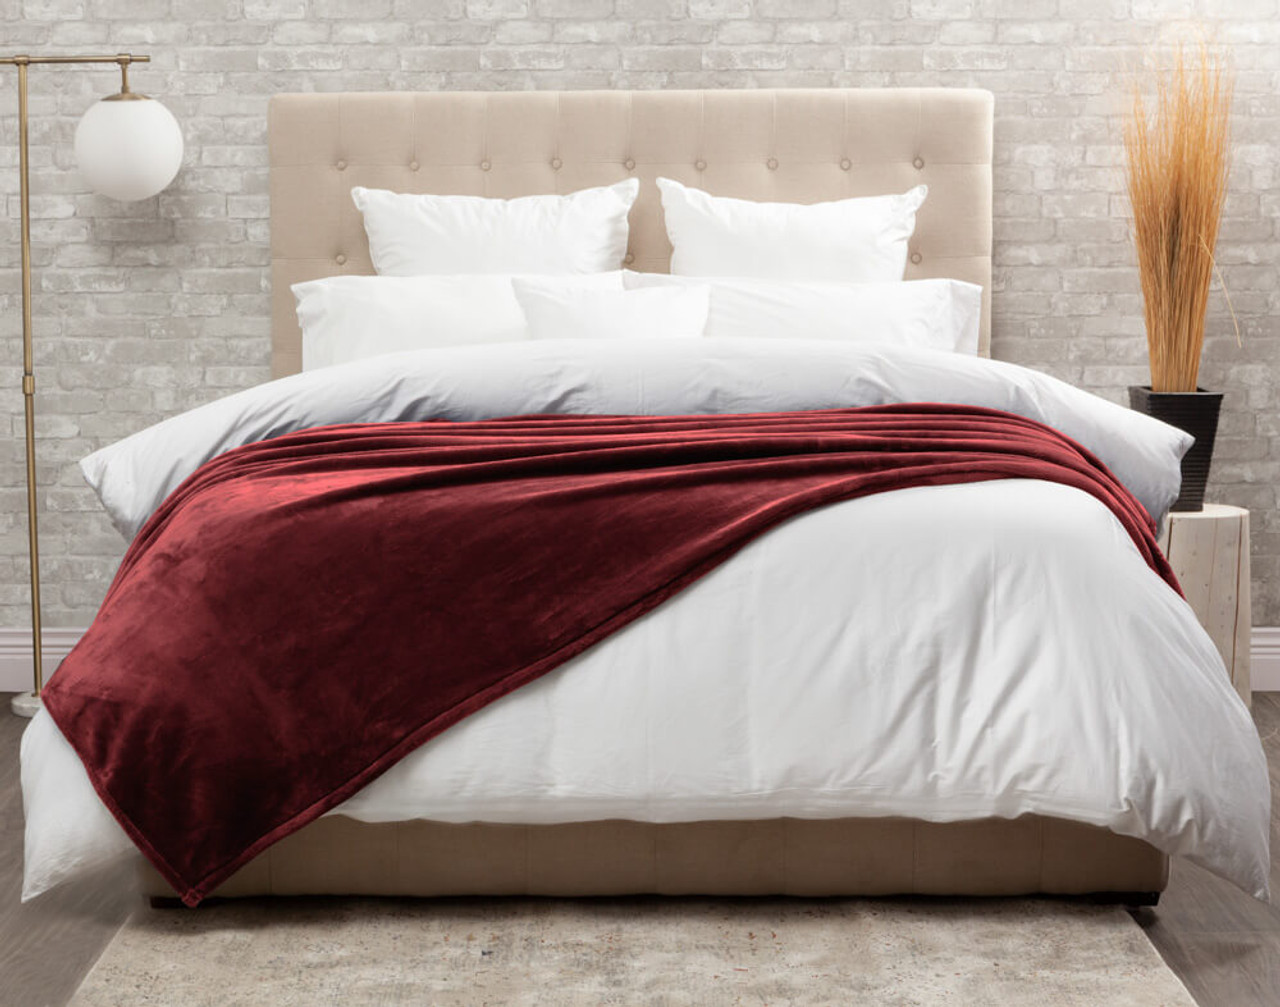 Our Rhubarb Cashmere Touch Fleece Blanket in Rhubarb dressed over a comfortable white bed.